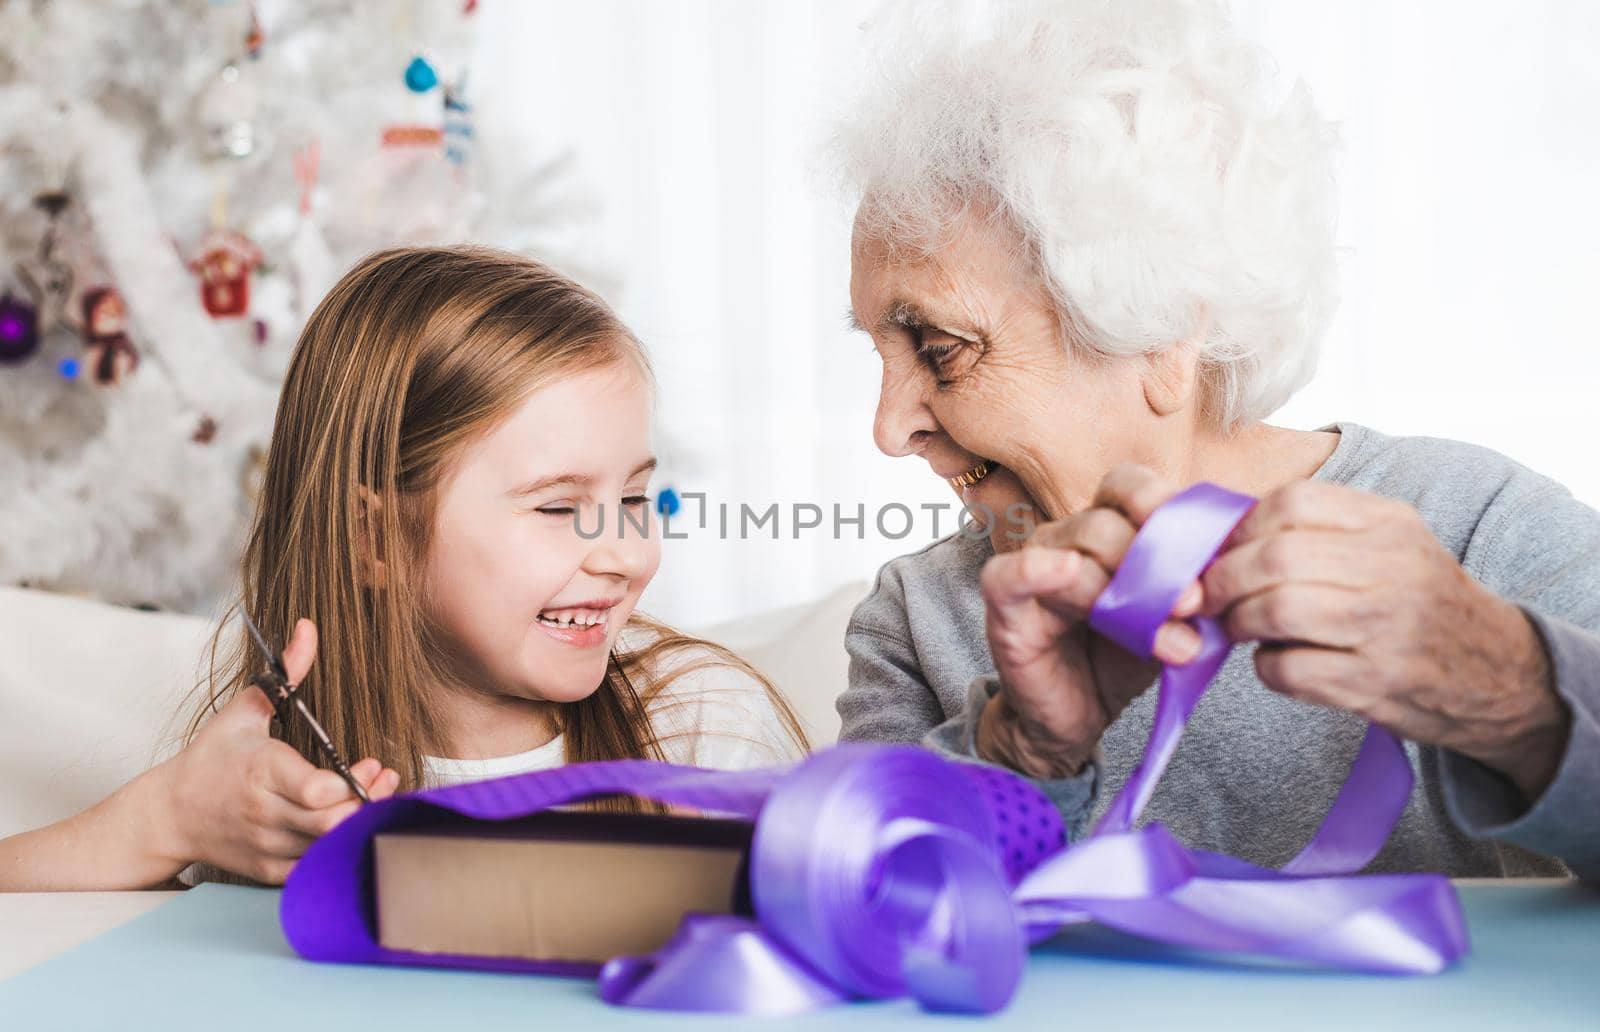 Smiling grandmother with little granddaughter decorating gifts together at Christmas